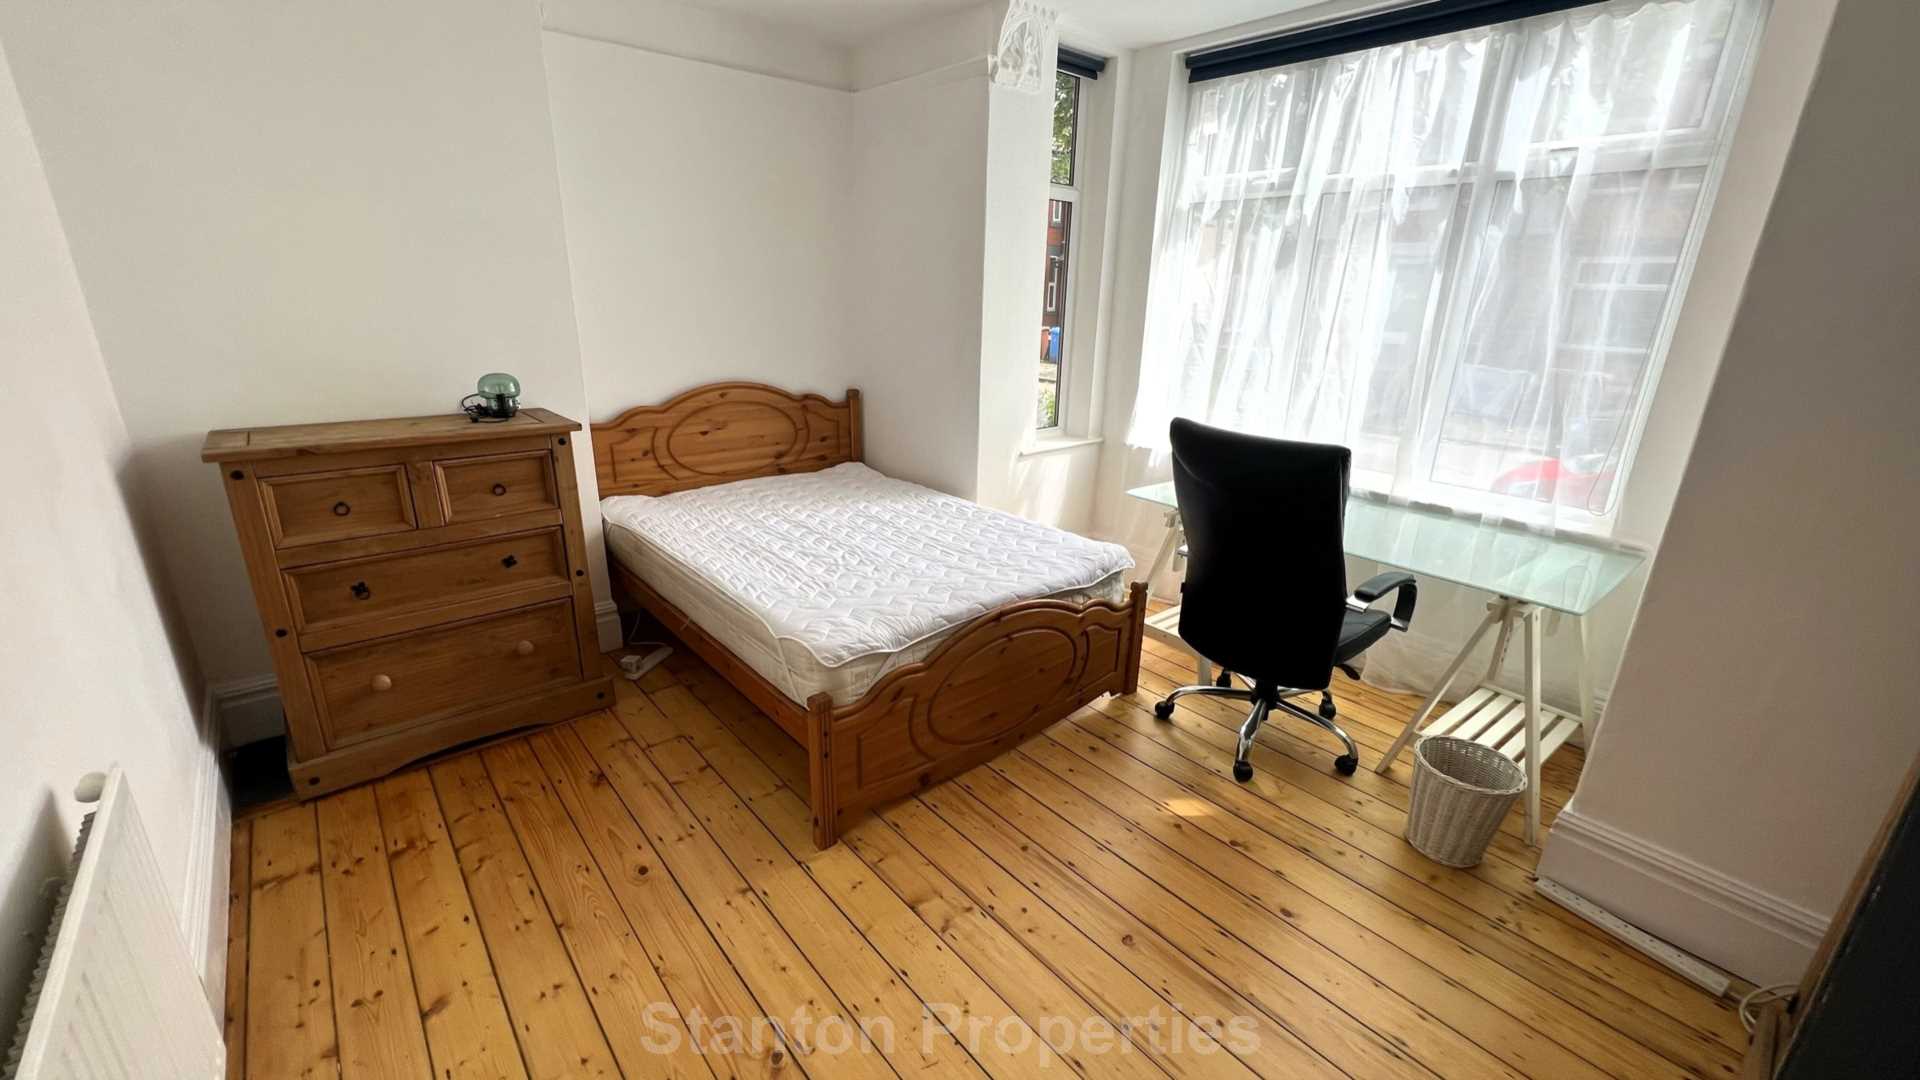 £145 pppw, Linden Grove, Fallowfield, Image 11